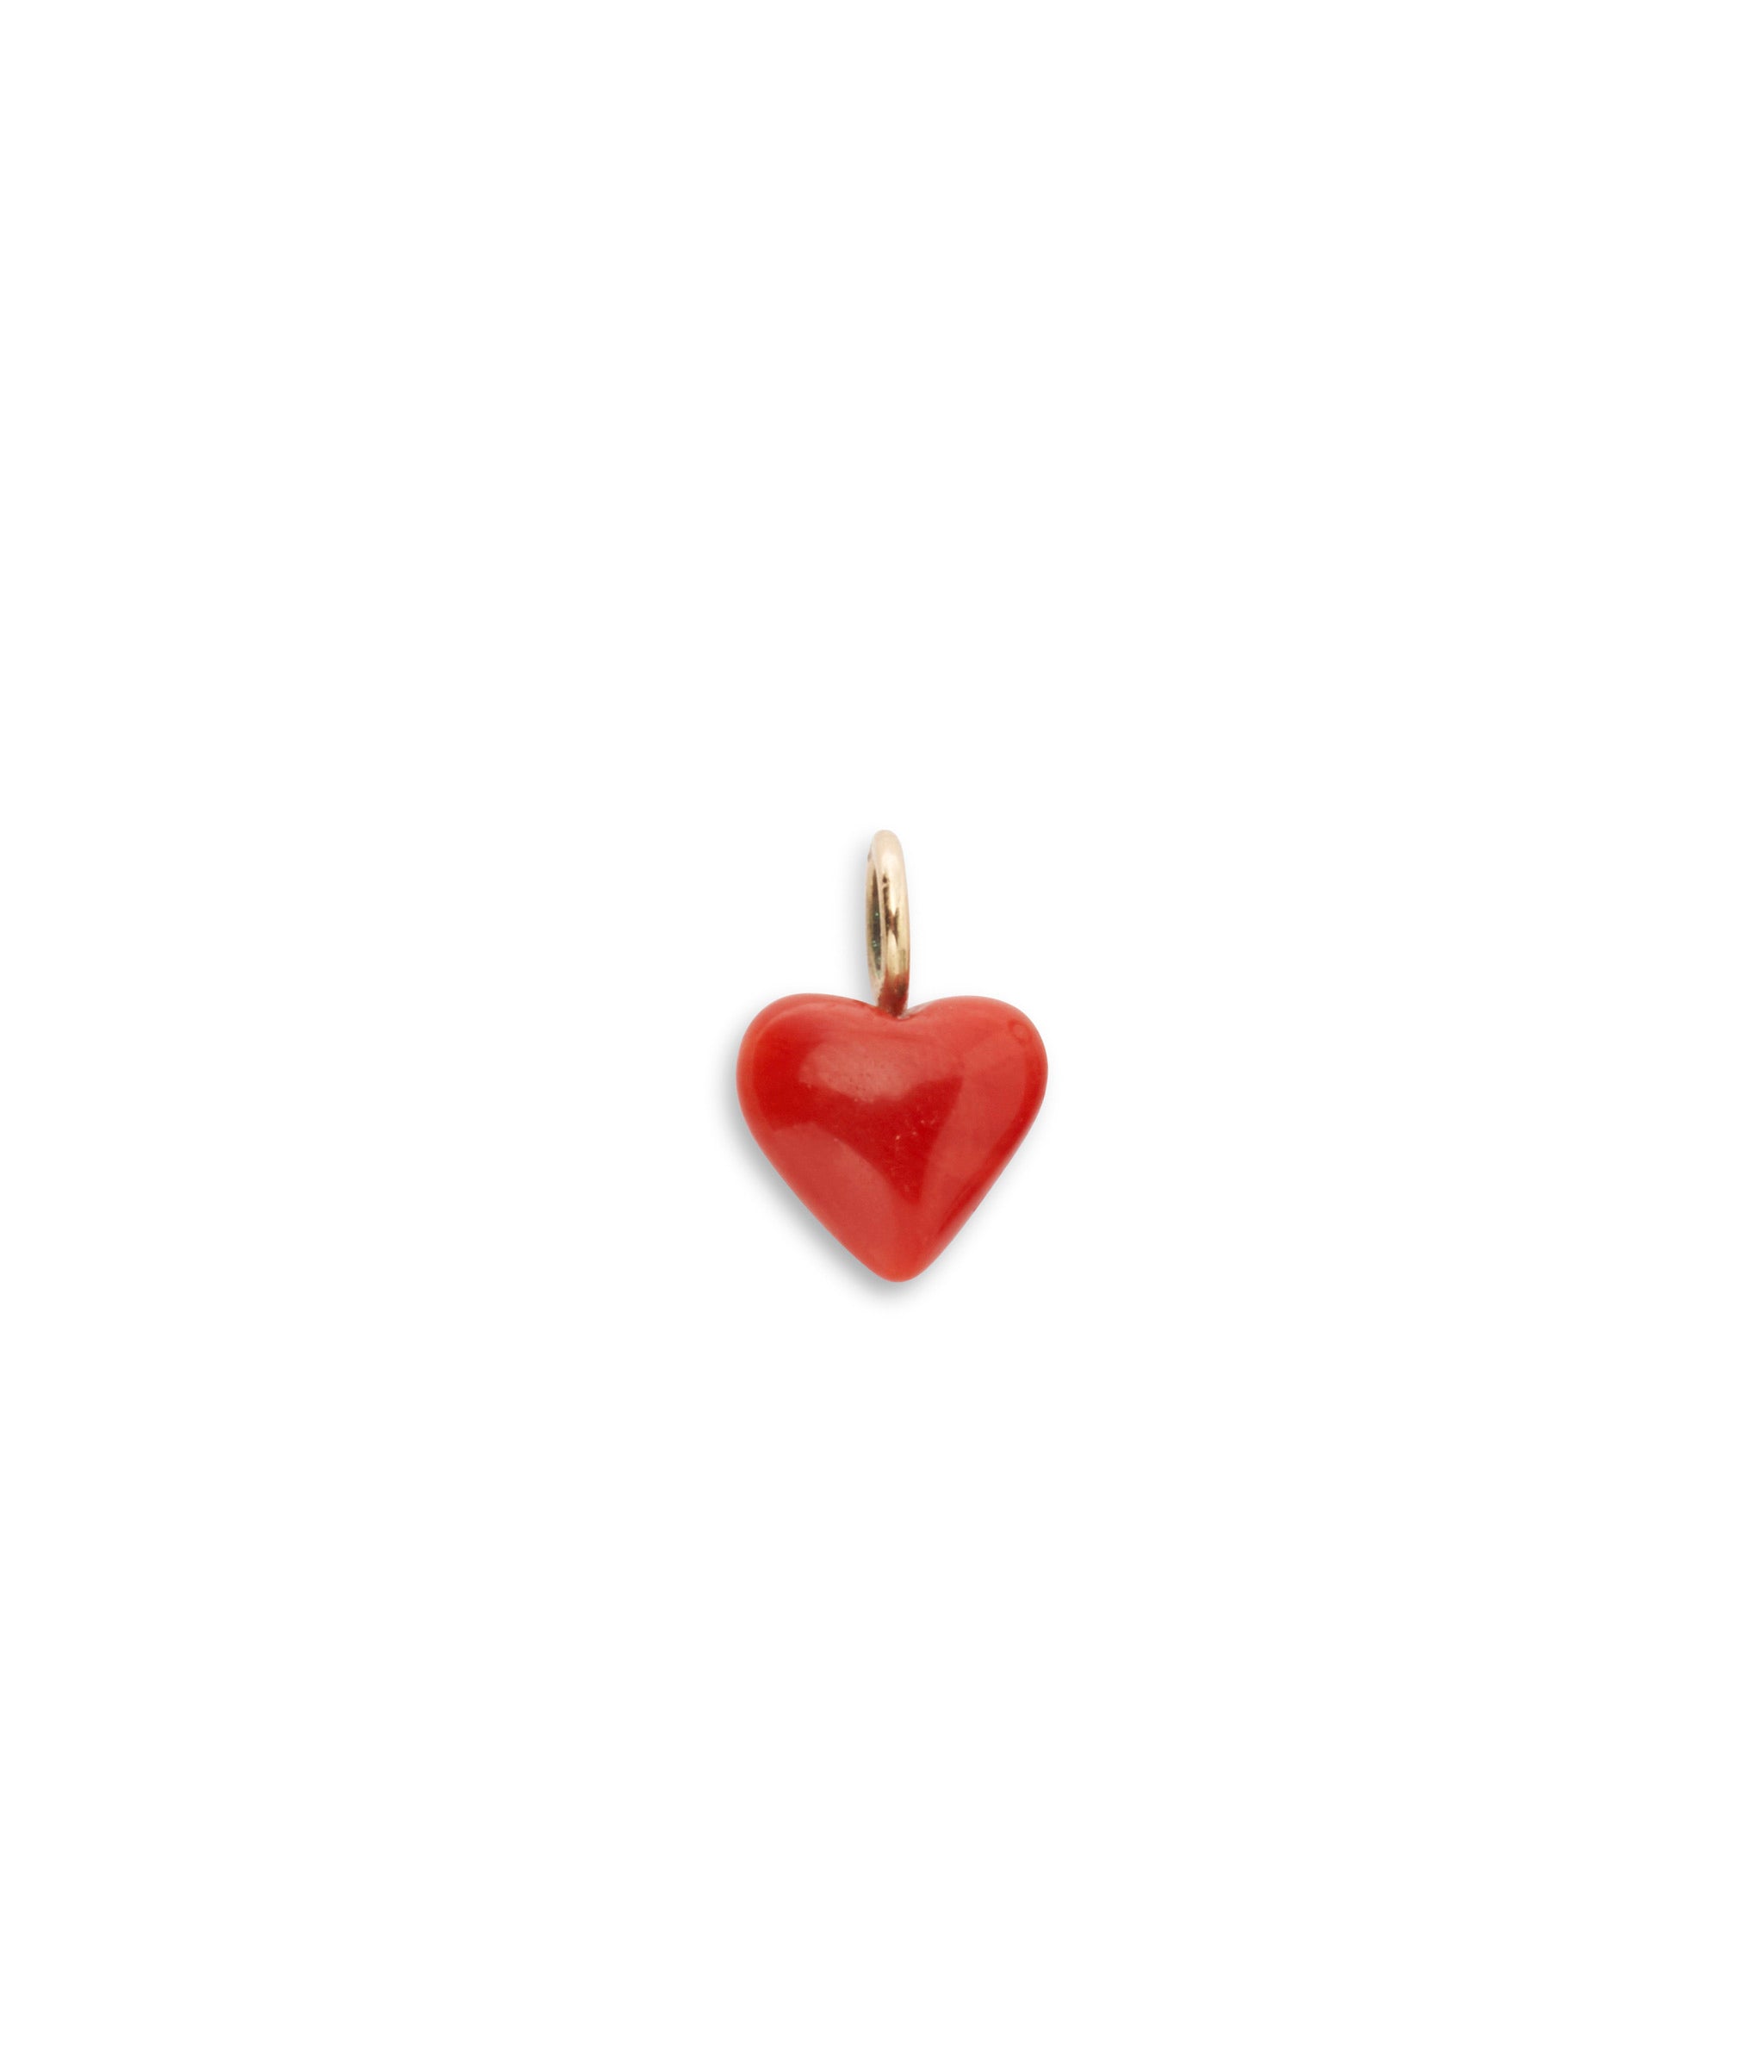 Puffy Coral Heart 14K Necklace Charm. Bright red coral heart necklace charm with 14k gold ring.